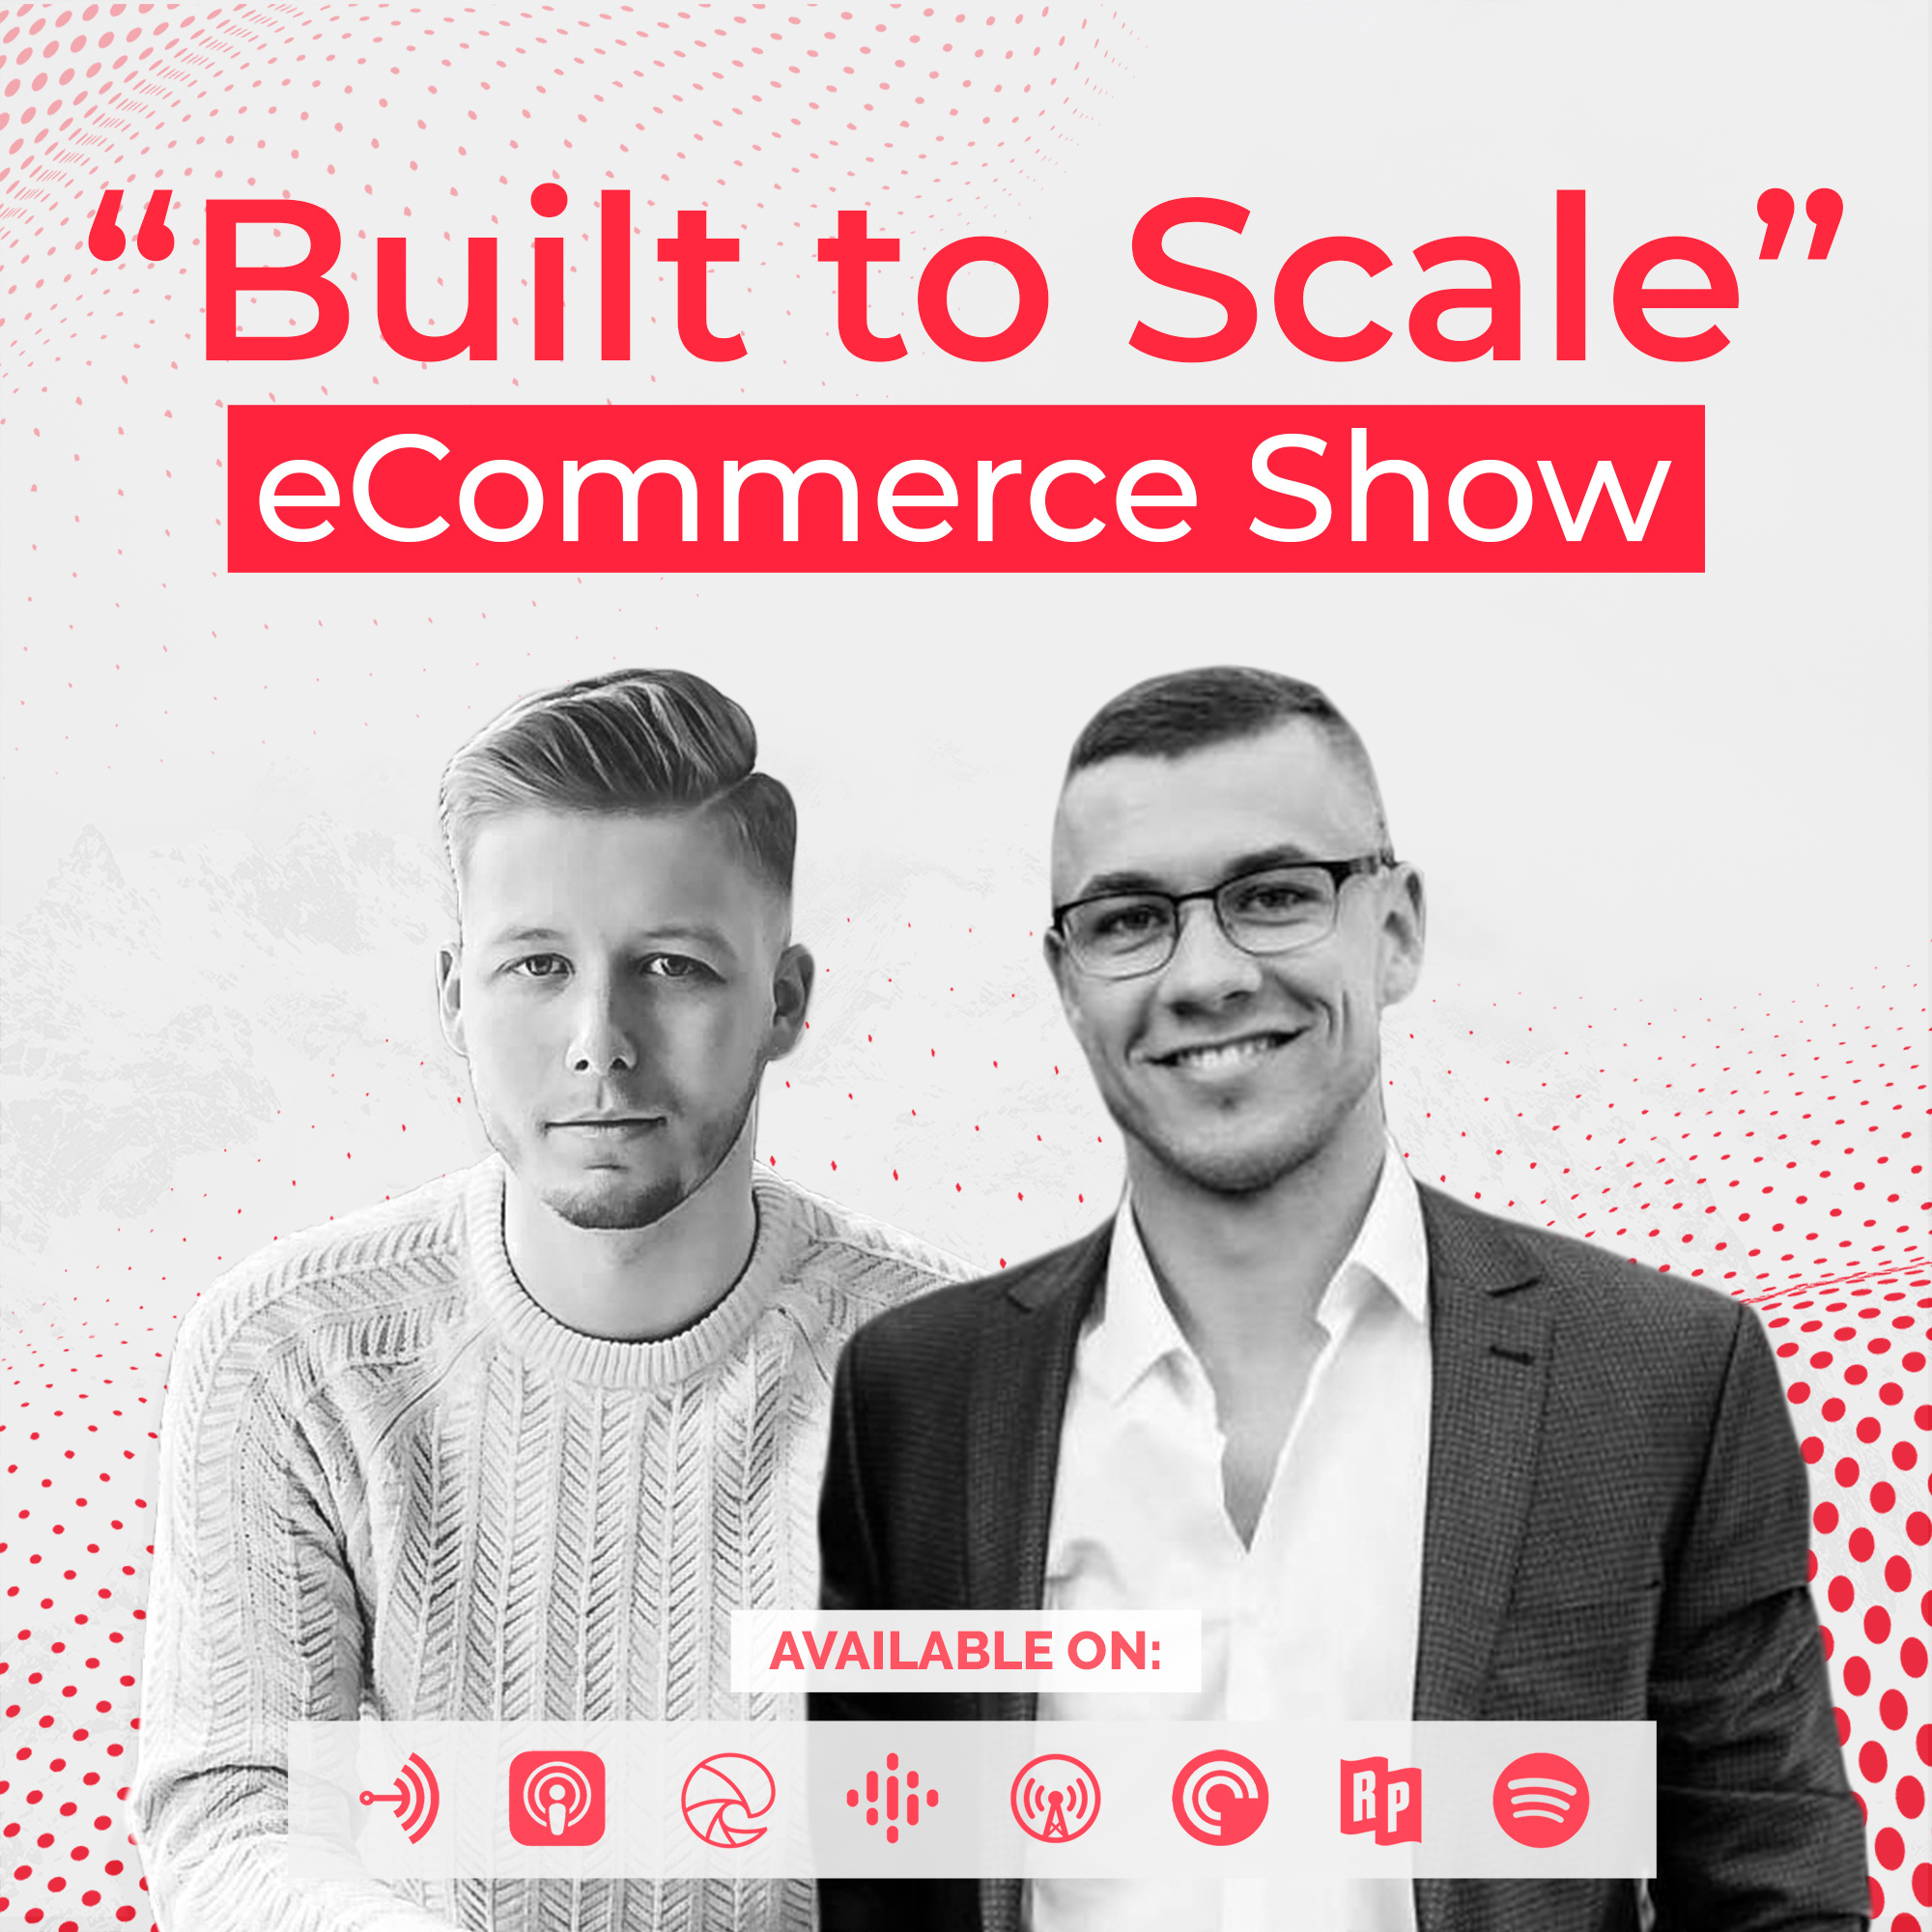 "Built to Scale" eCommerce Show